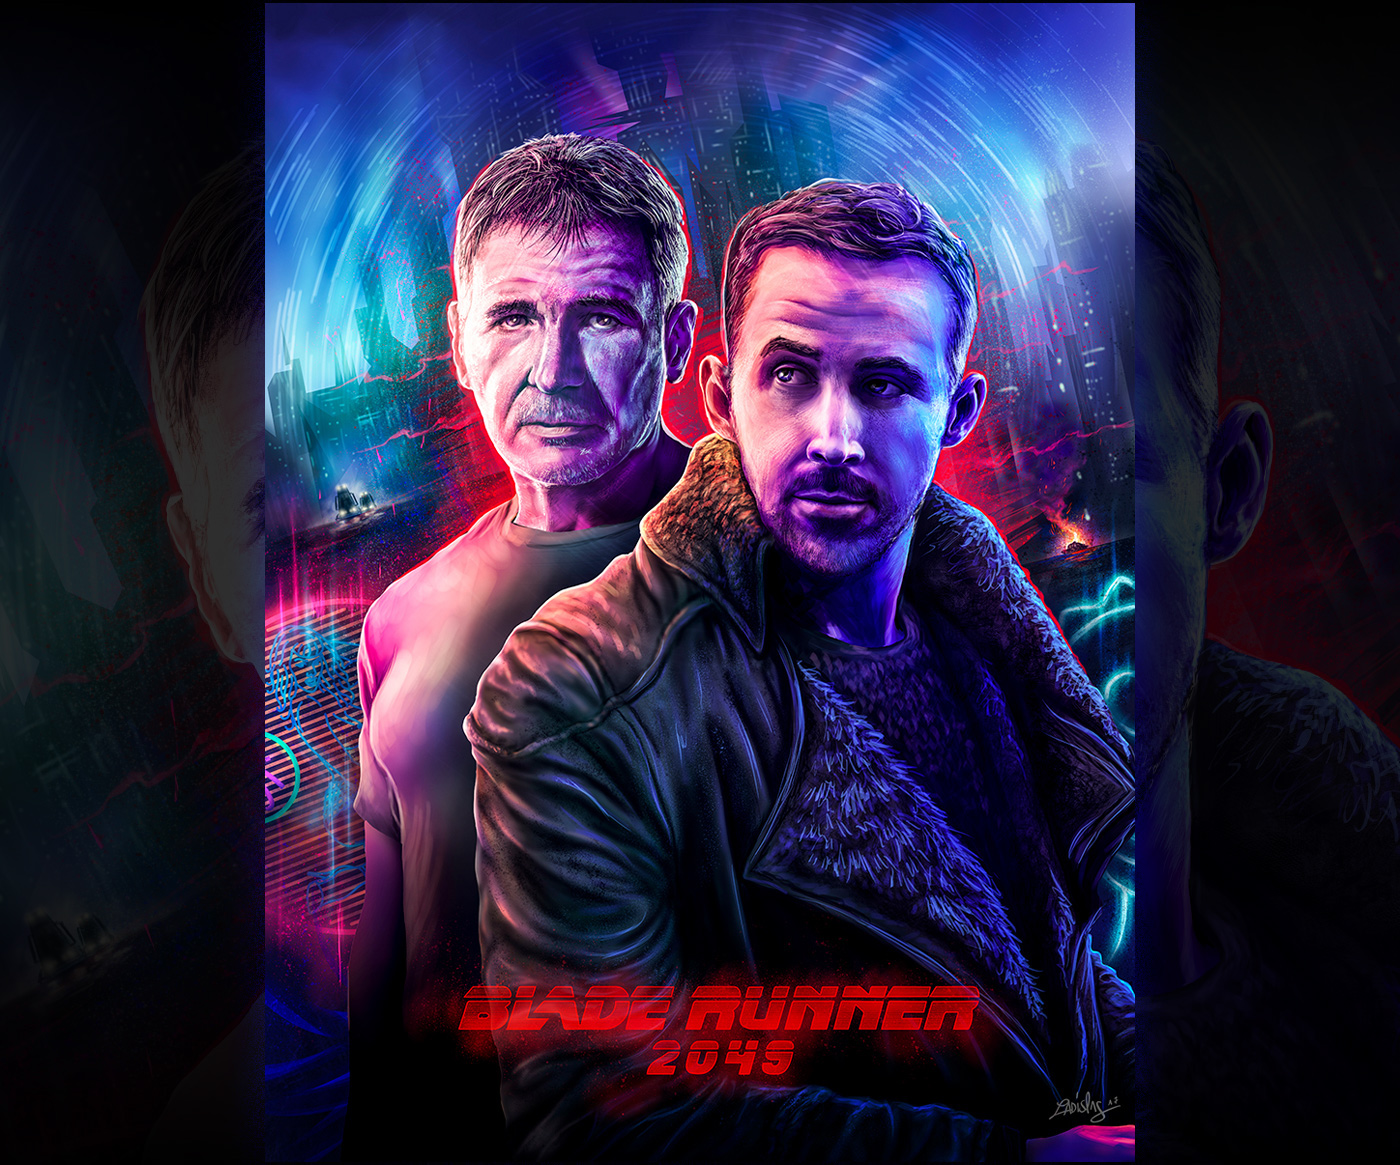 Art Tributes for the upcoming Blade Runner 2049 movie